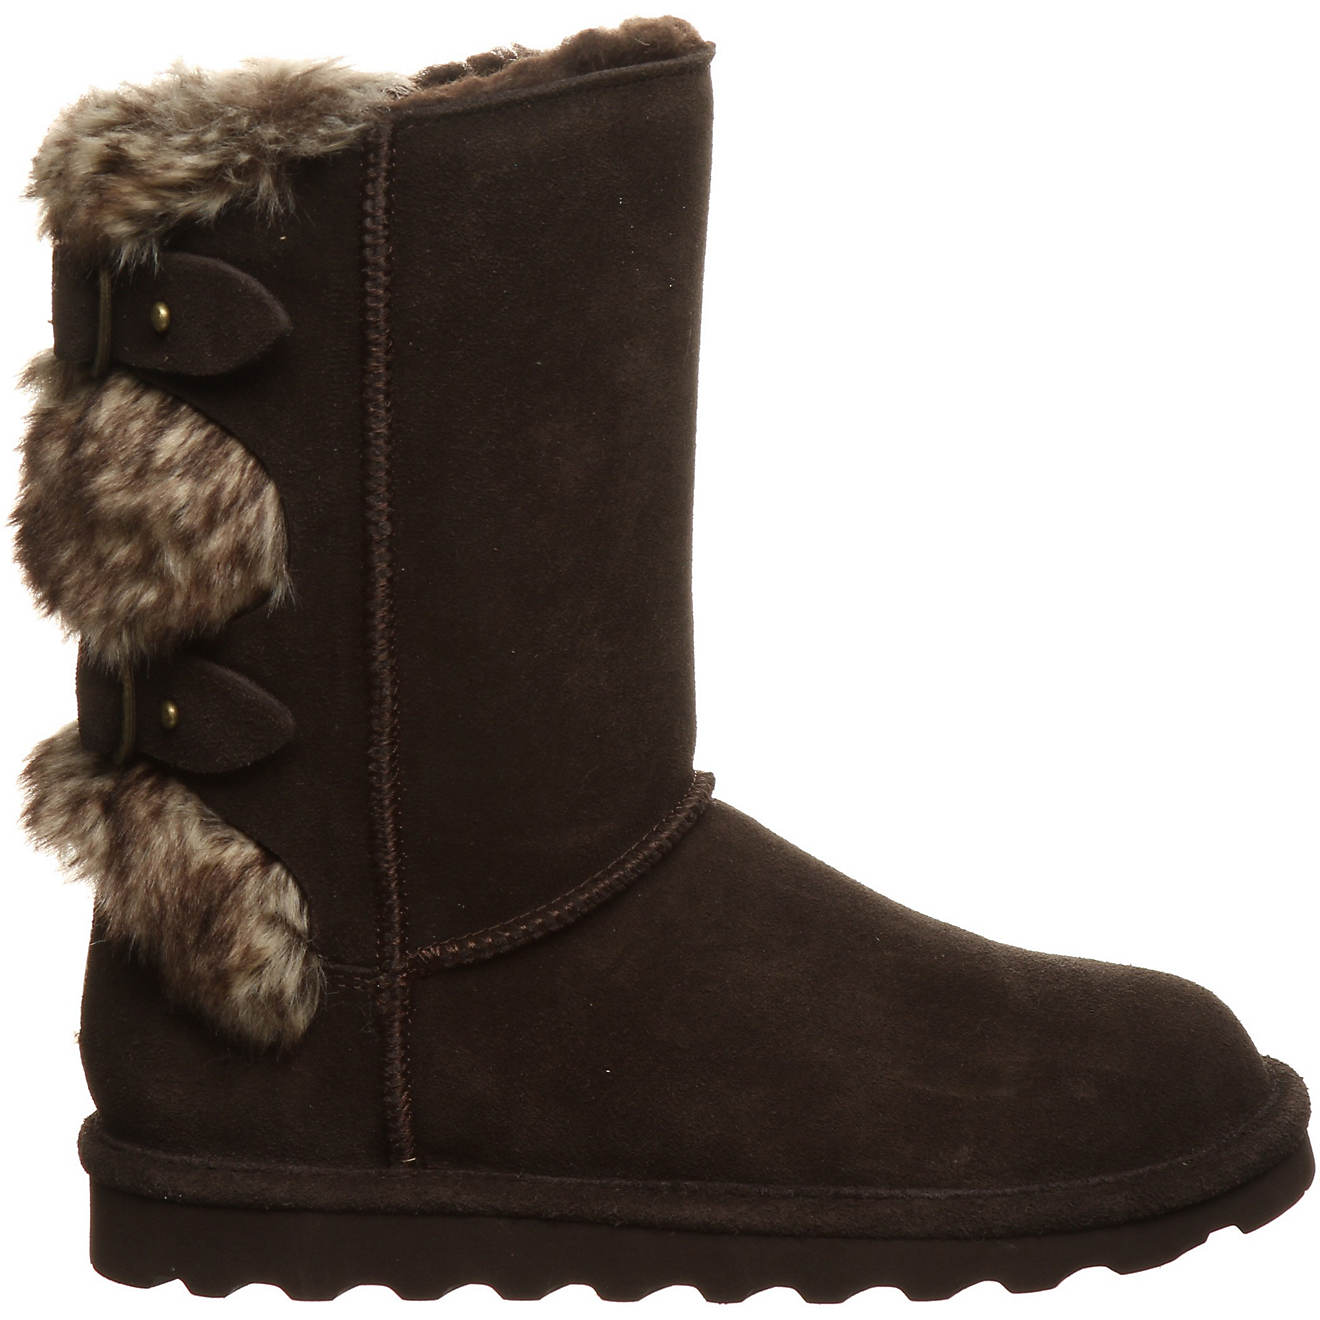 Bearpaw Women’s Eloise Boots | Free Shipping at Academy